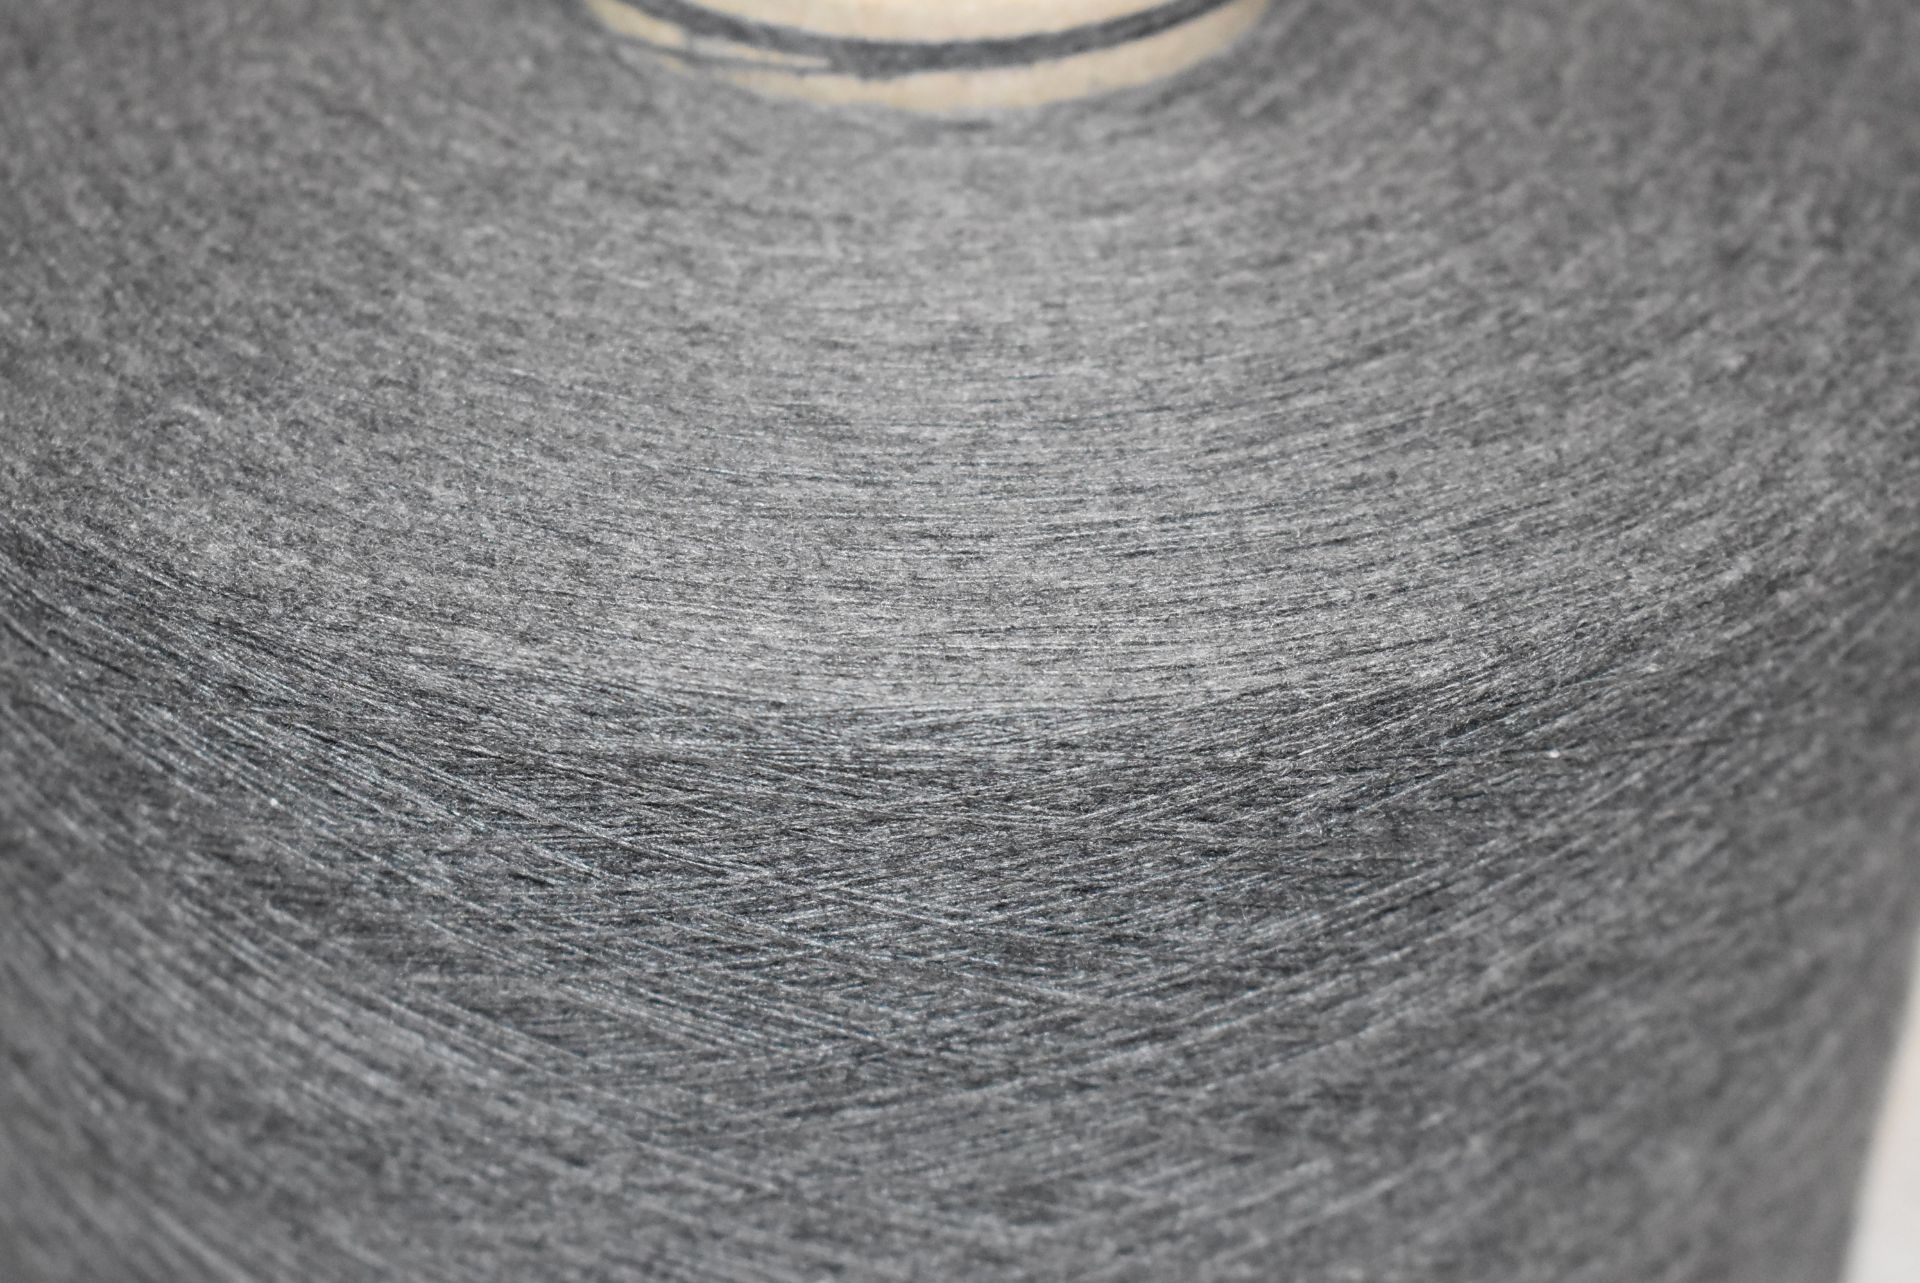 36 x Cones of 1/13 MicroCotton Knitting Yarn - Mid Grey - Approx Weight: 2,500g - New Stock ABL Yarn - Image 5 of 12